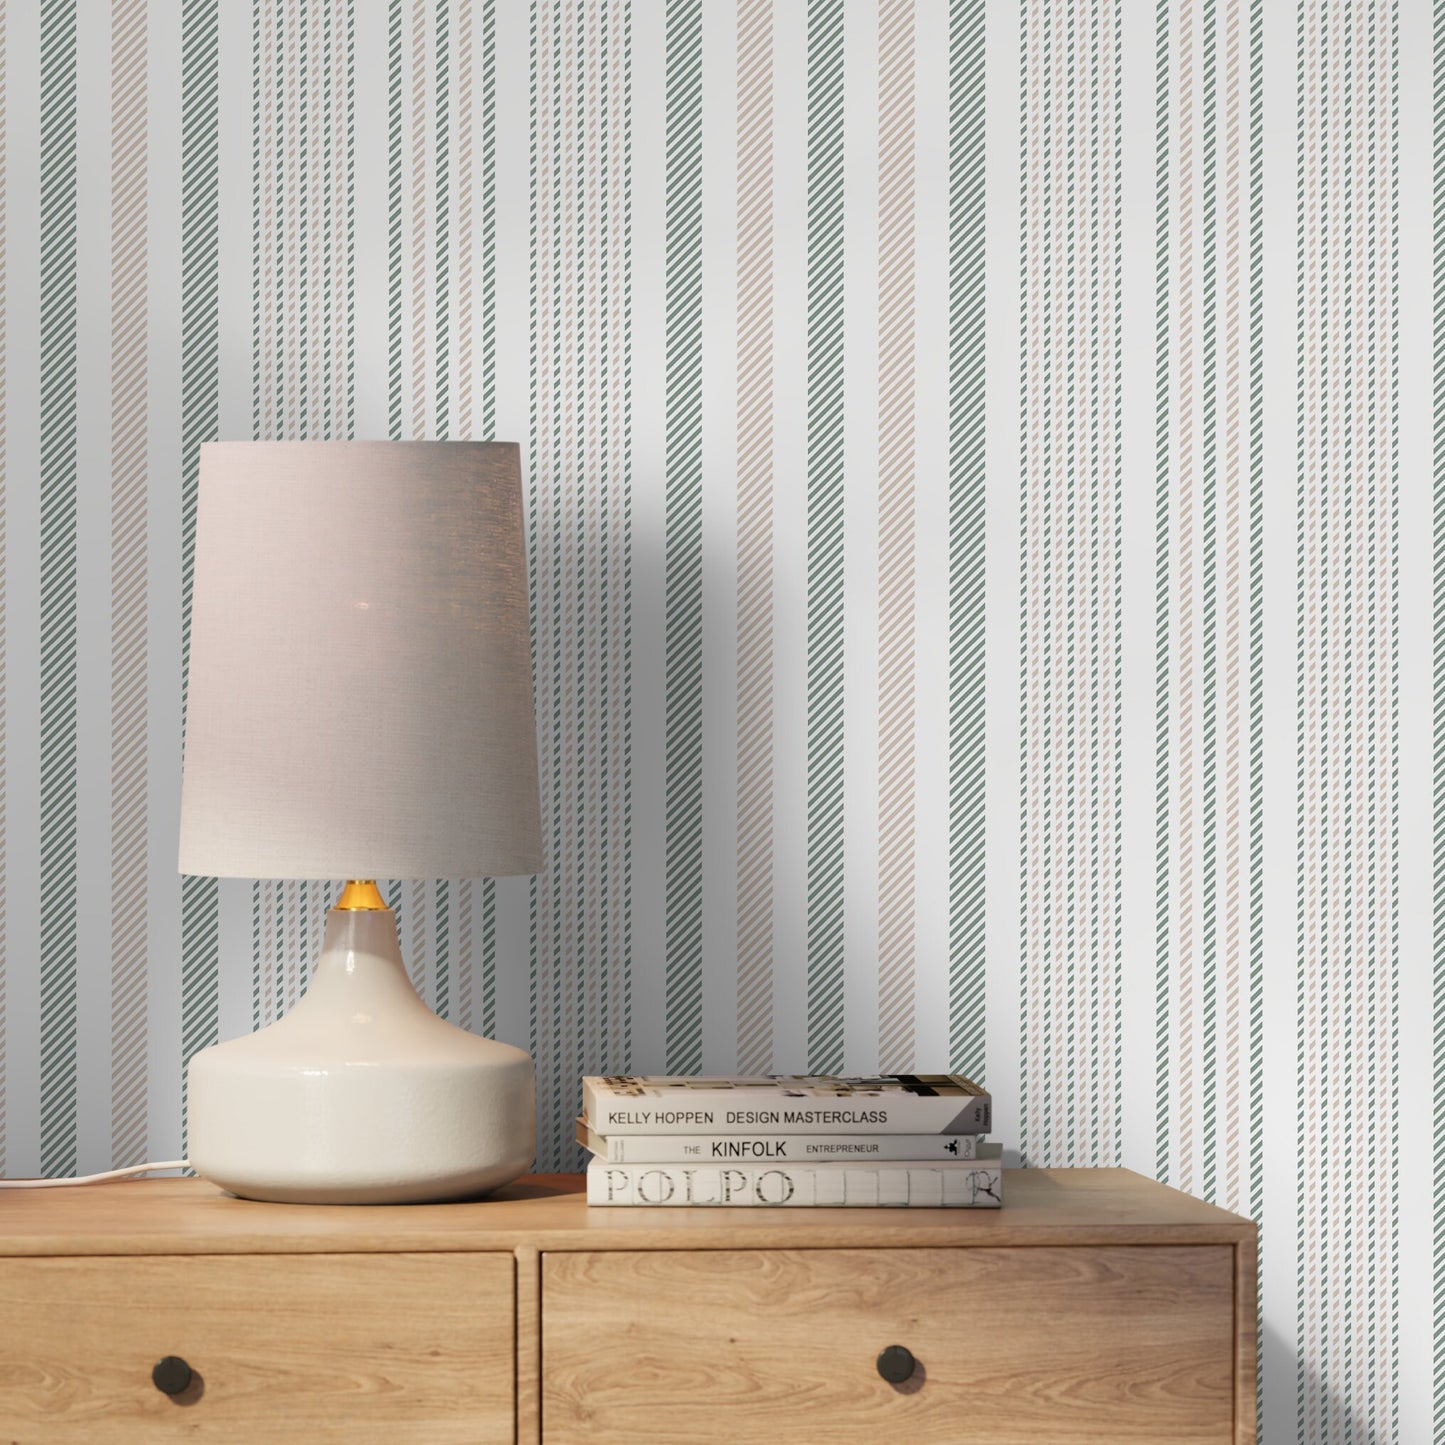 Minimalist Striped Wallpaper Farmhouse wallpaper Peel and Stick and Traditional Wallpaper - D805